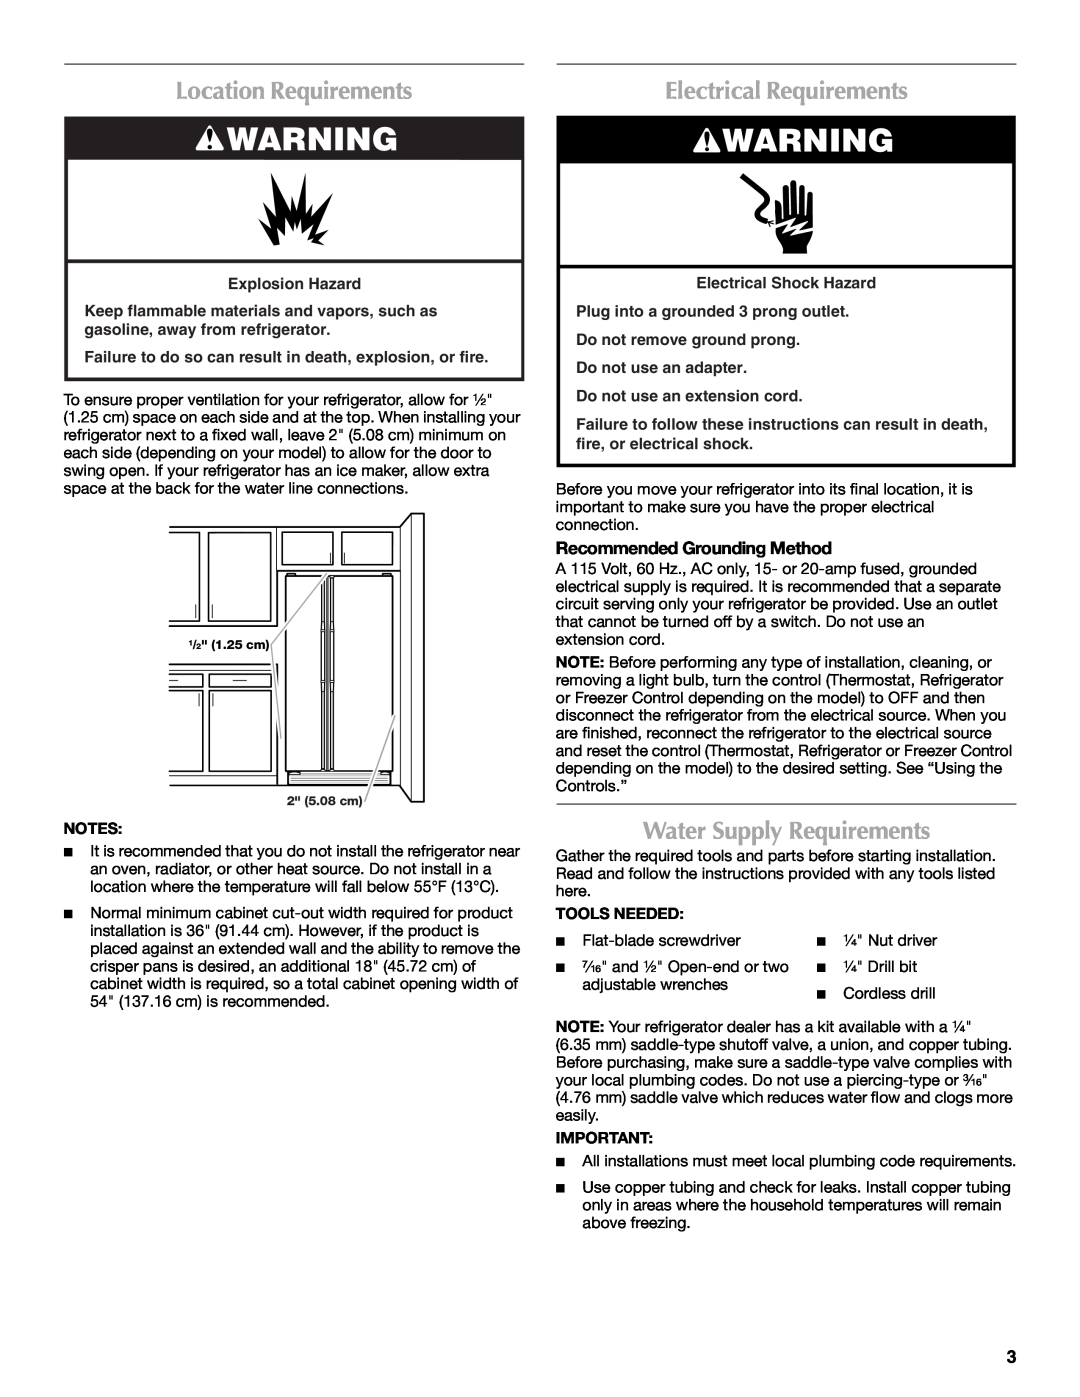 Maytag MSD2254VEW Location Requirements, Electrical Requirements, Water Supply Requirements, Recommended Grounding Method 